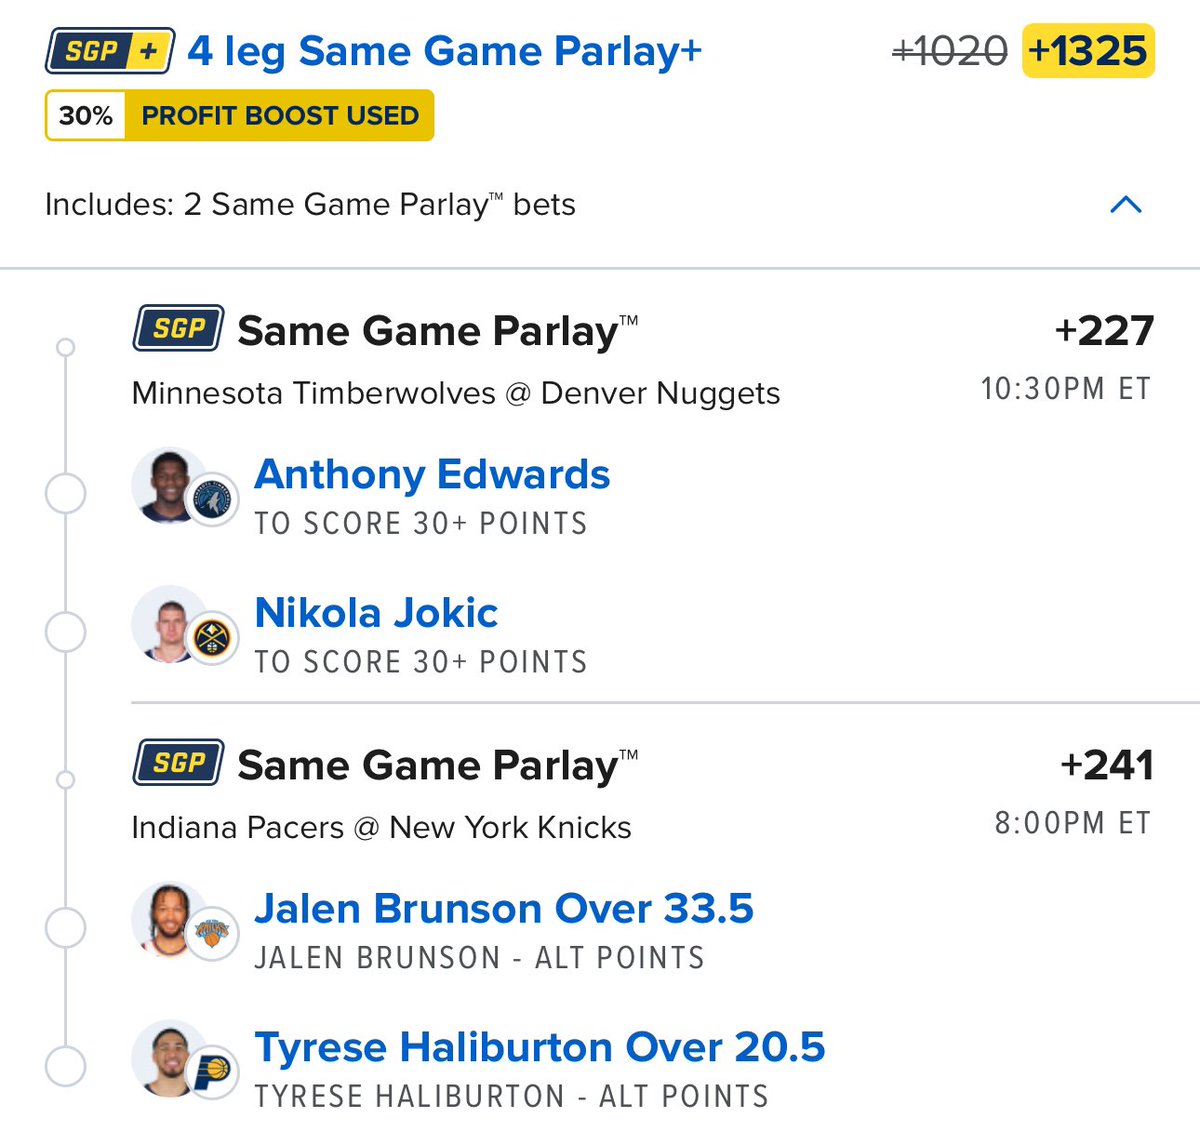 NBA Parlay for tonight. Just makes too much sense! 

Whop.com/parlayscience